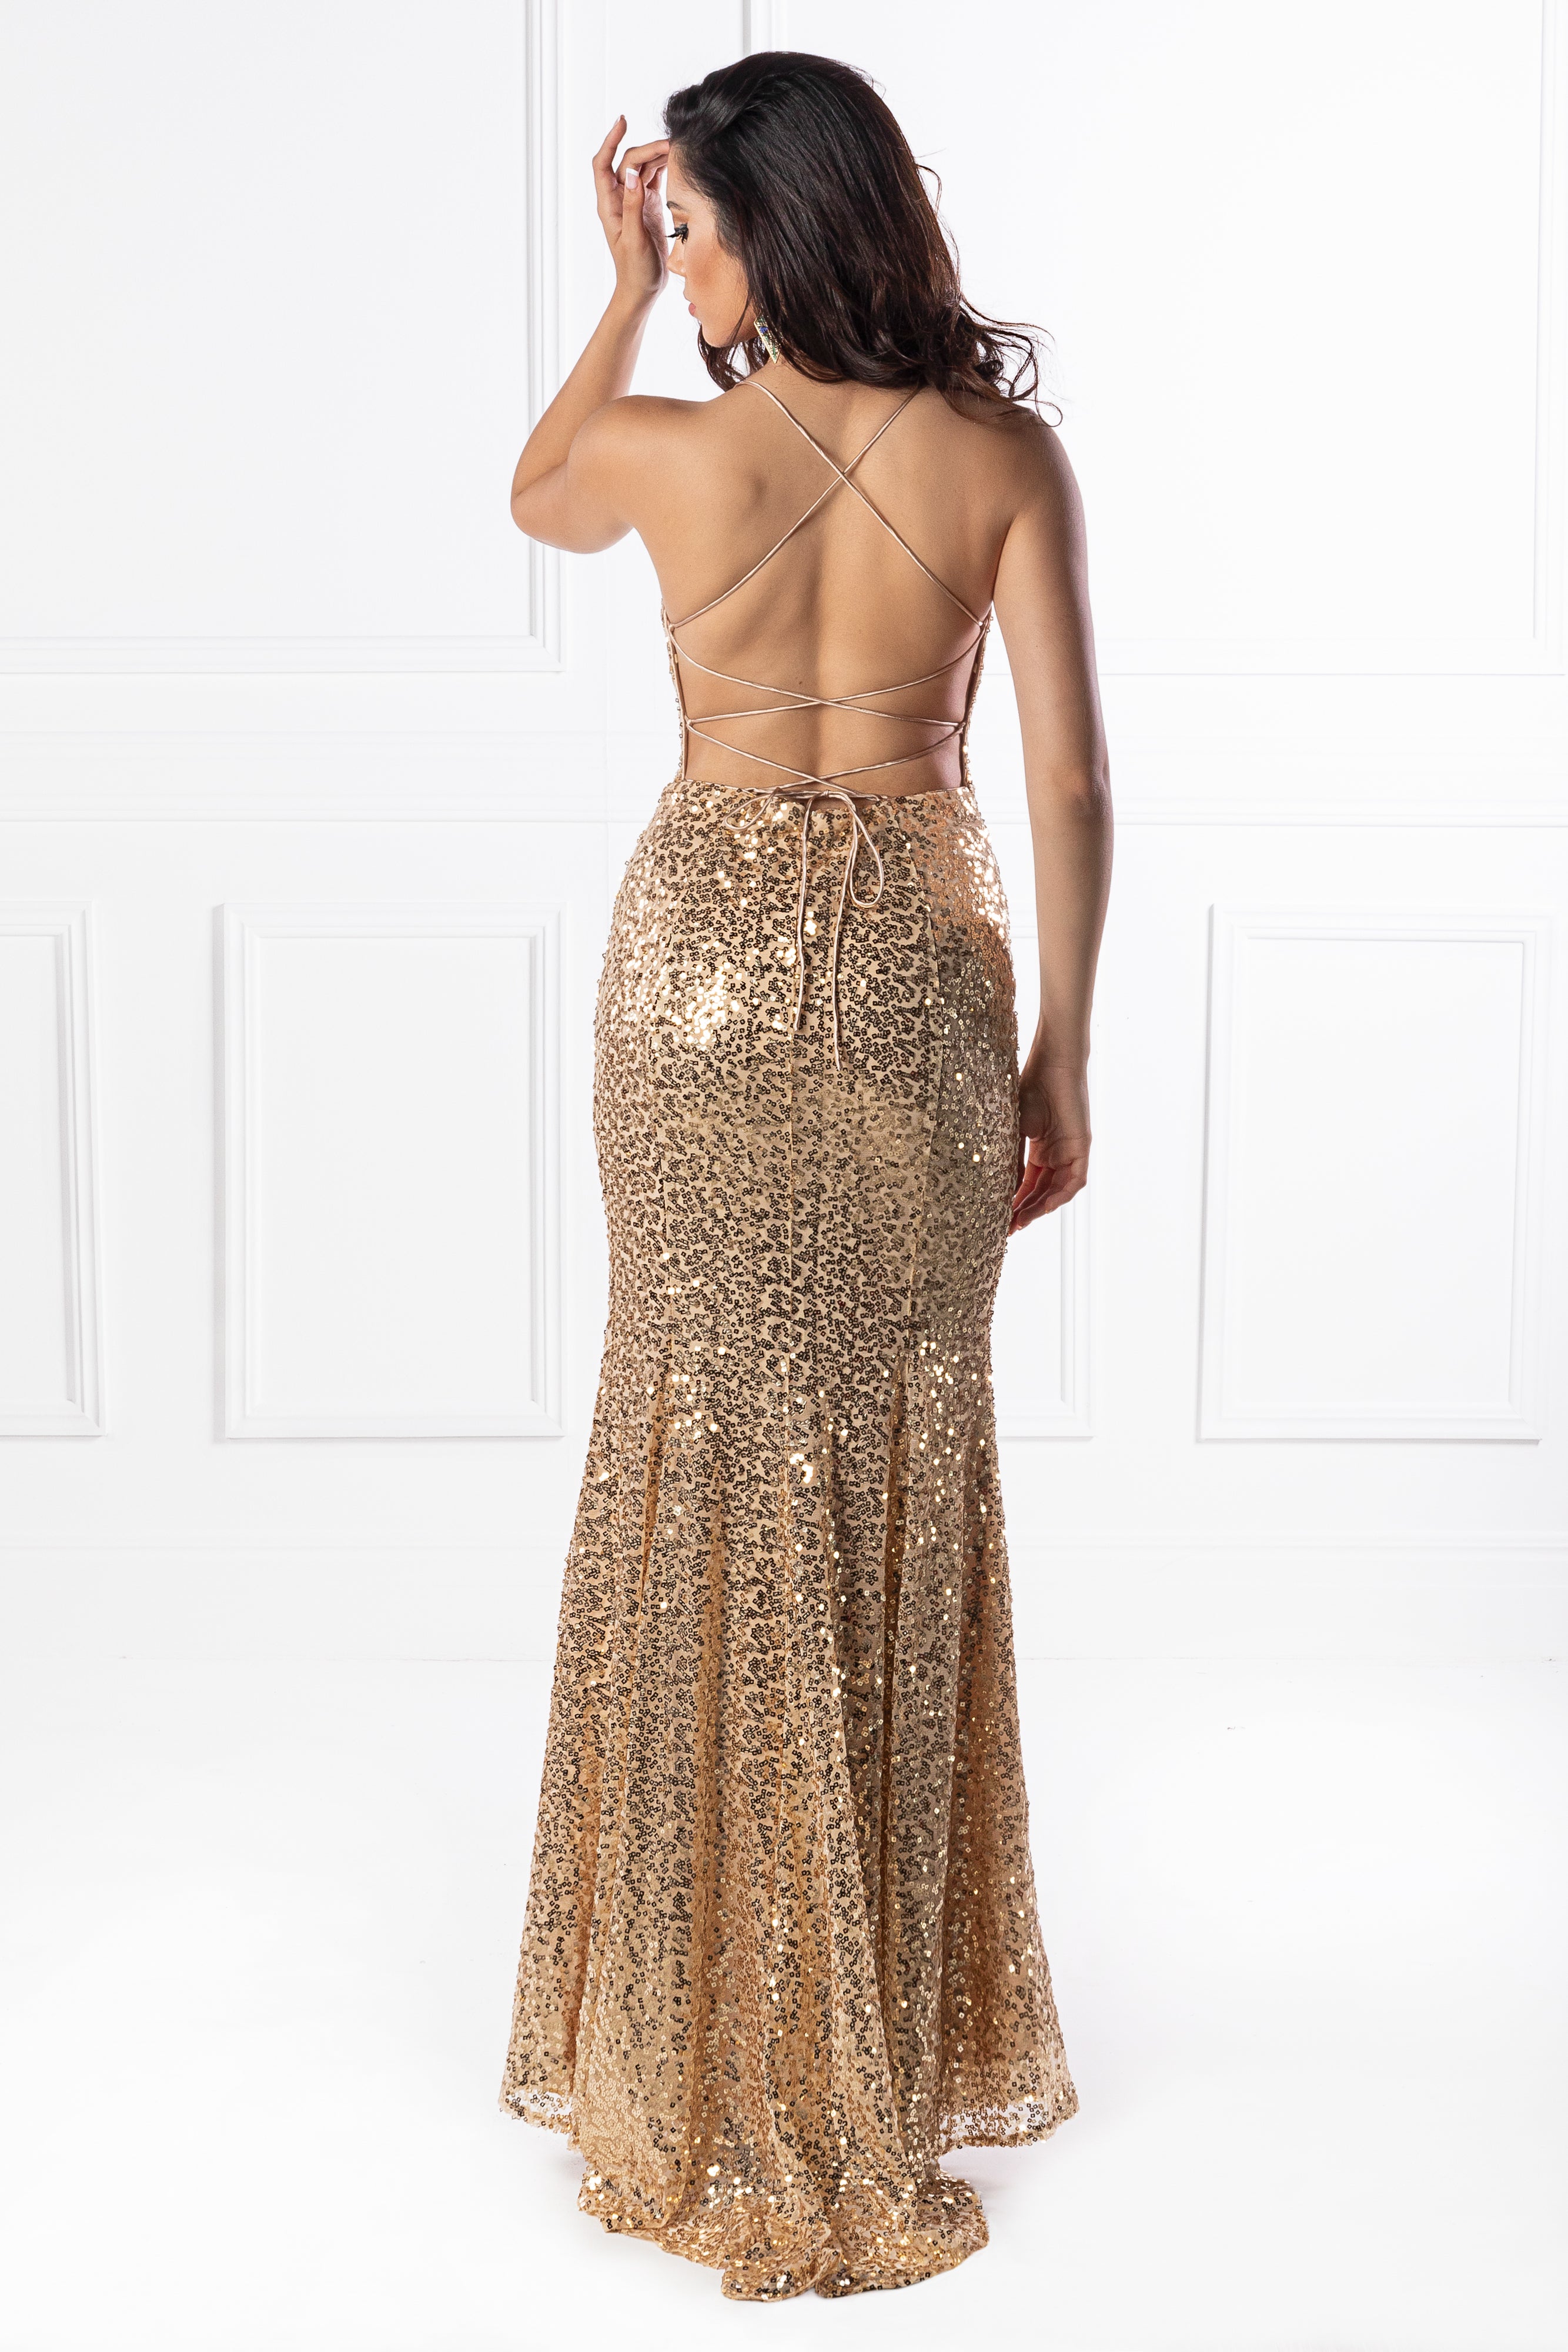 Honey Couture YASMIN Black & Gold Sequin Formal Gown